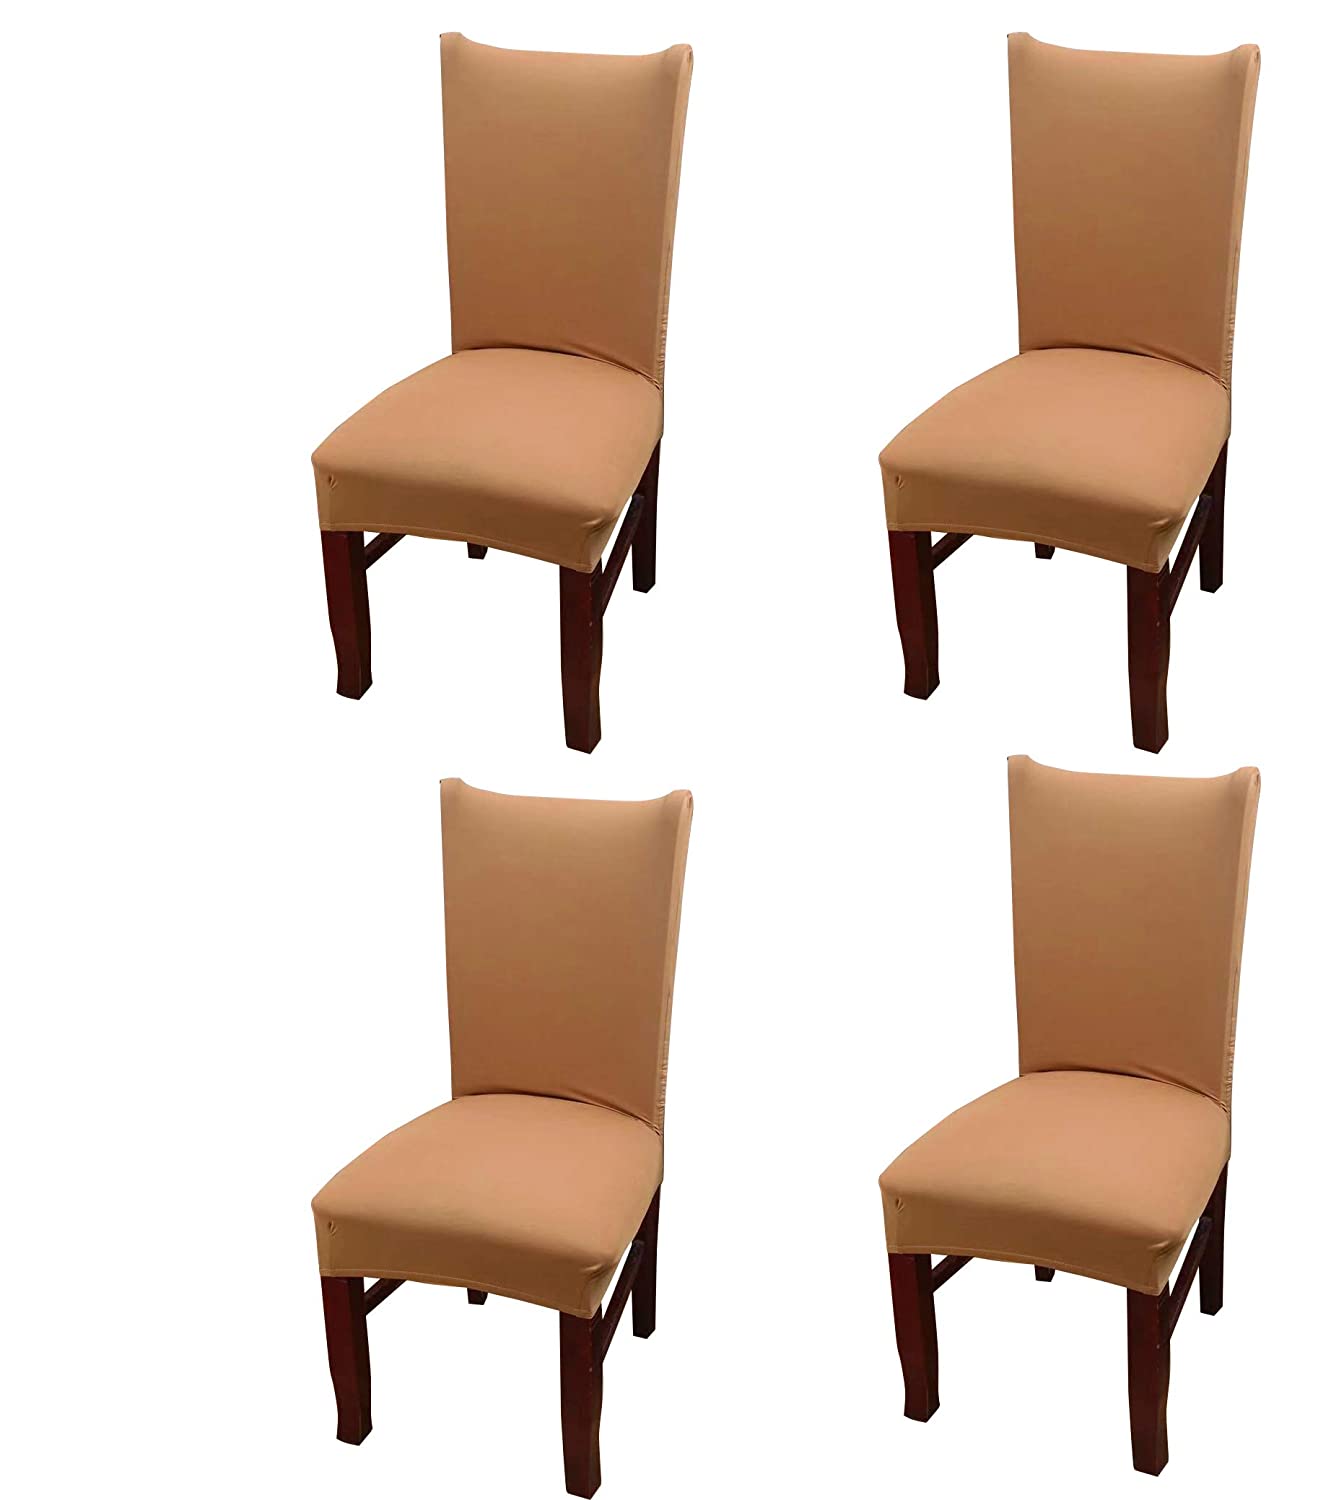 Solid Elastic Chair Cover - Beige